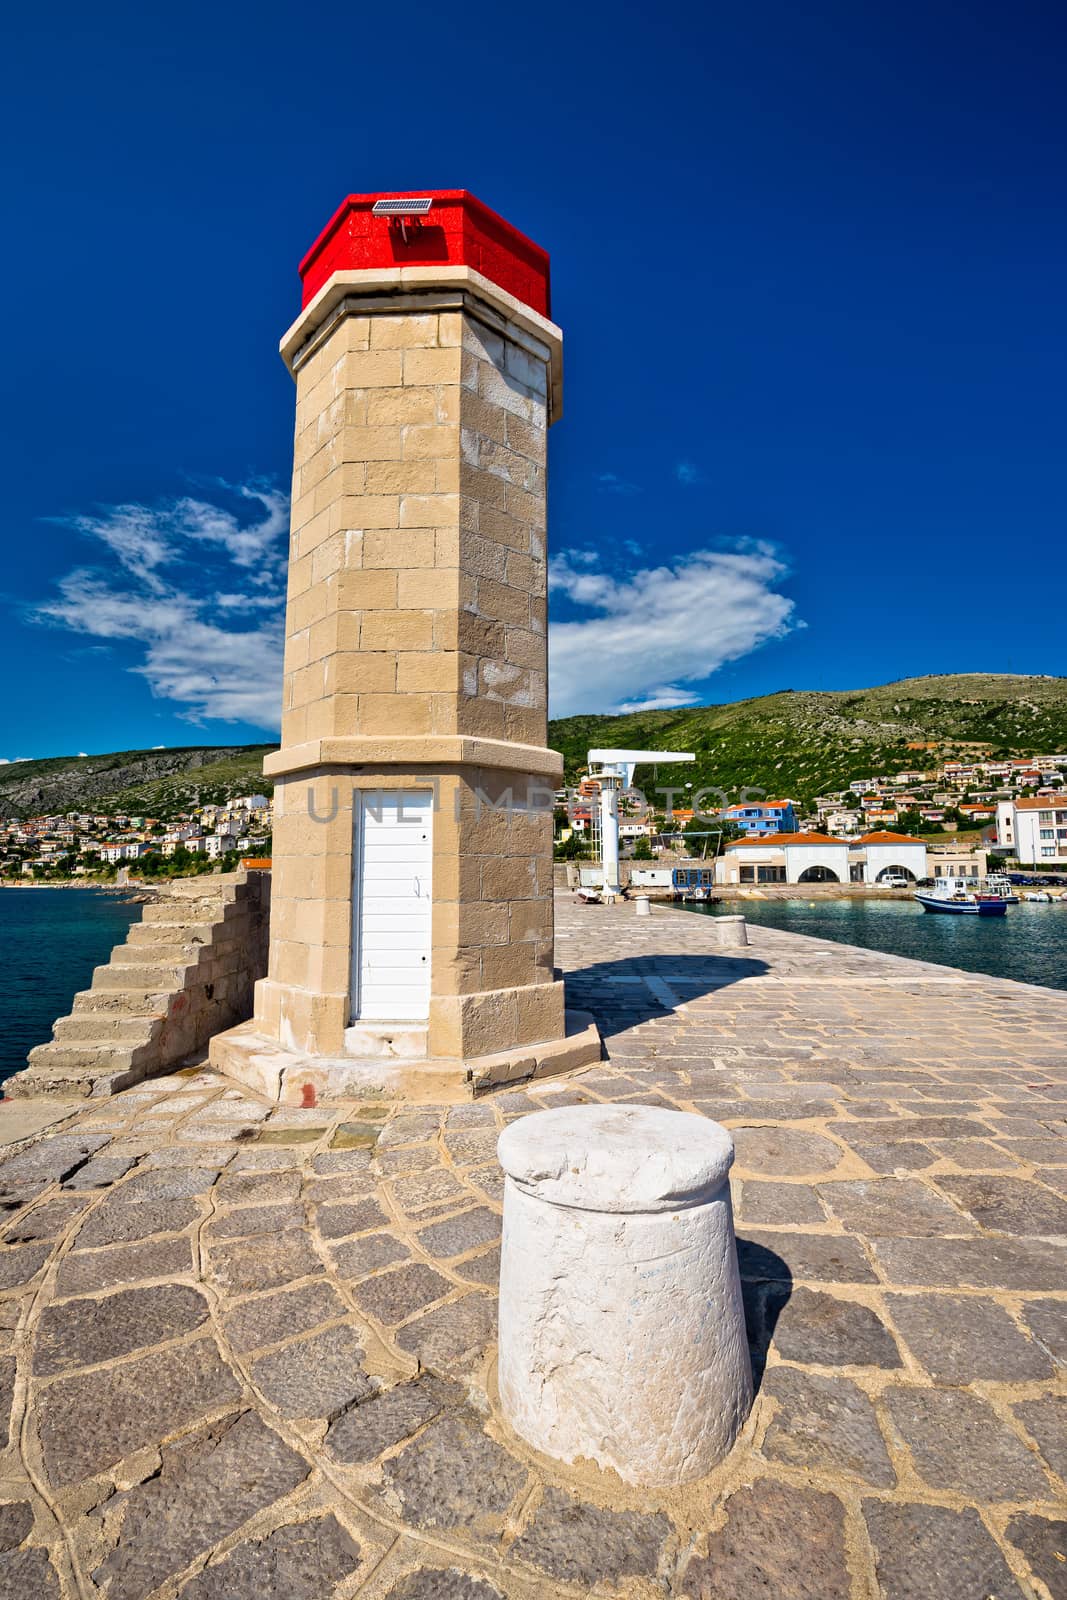 Lighthouse in Adriatic town of Senj by xbrchx